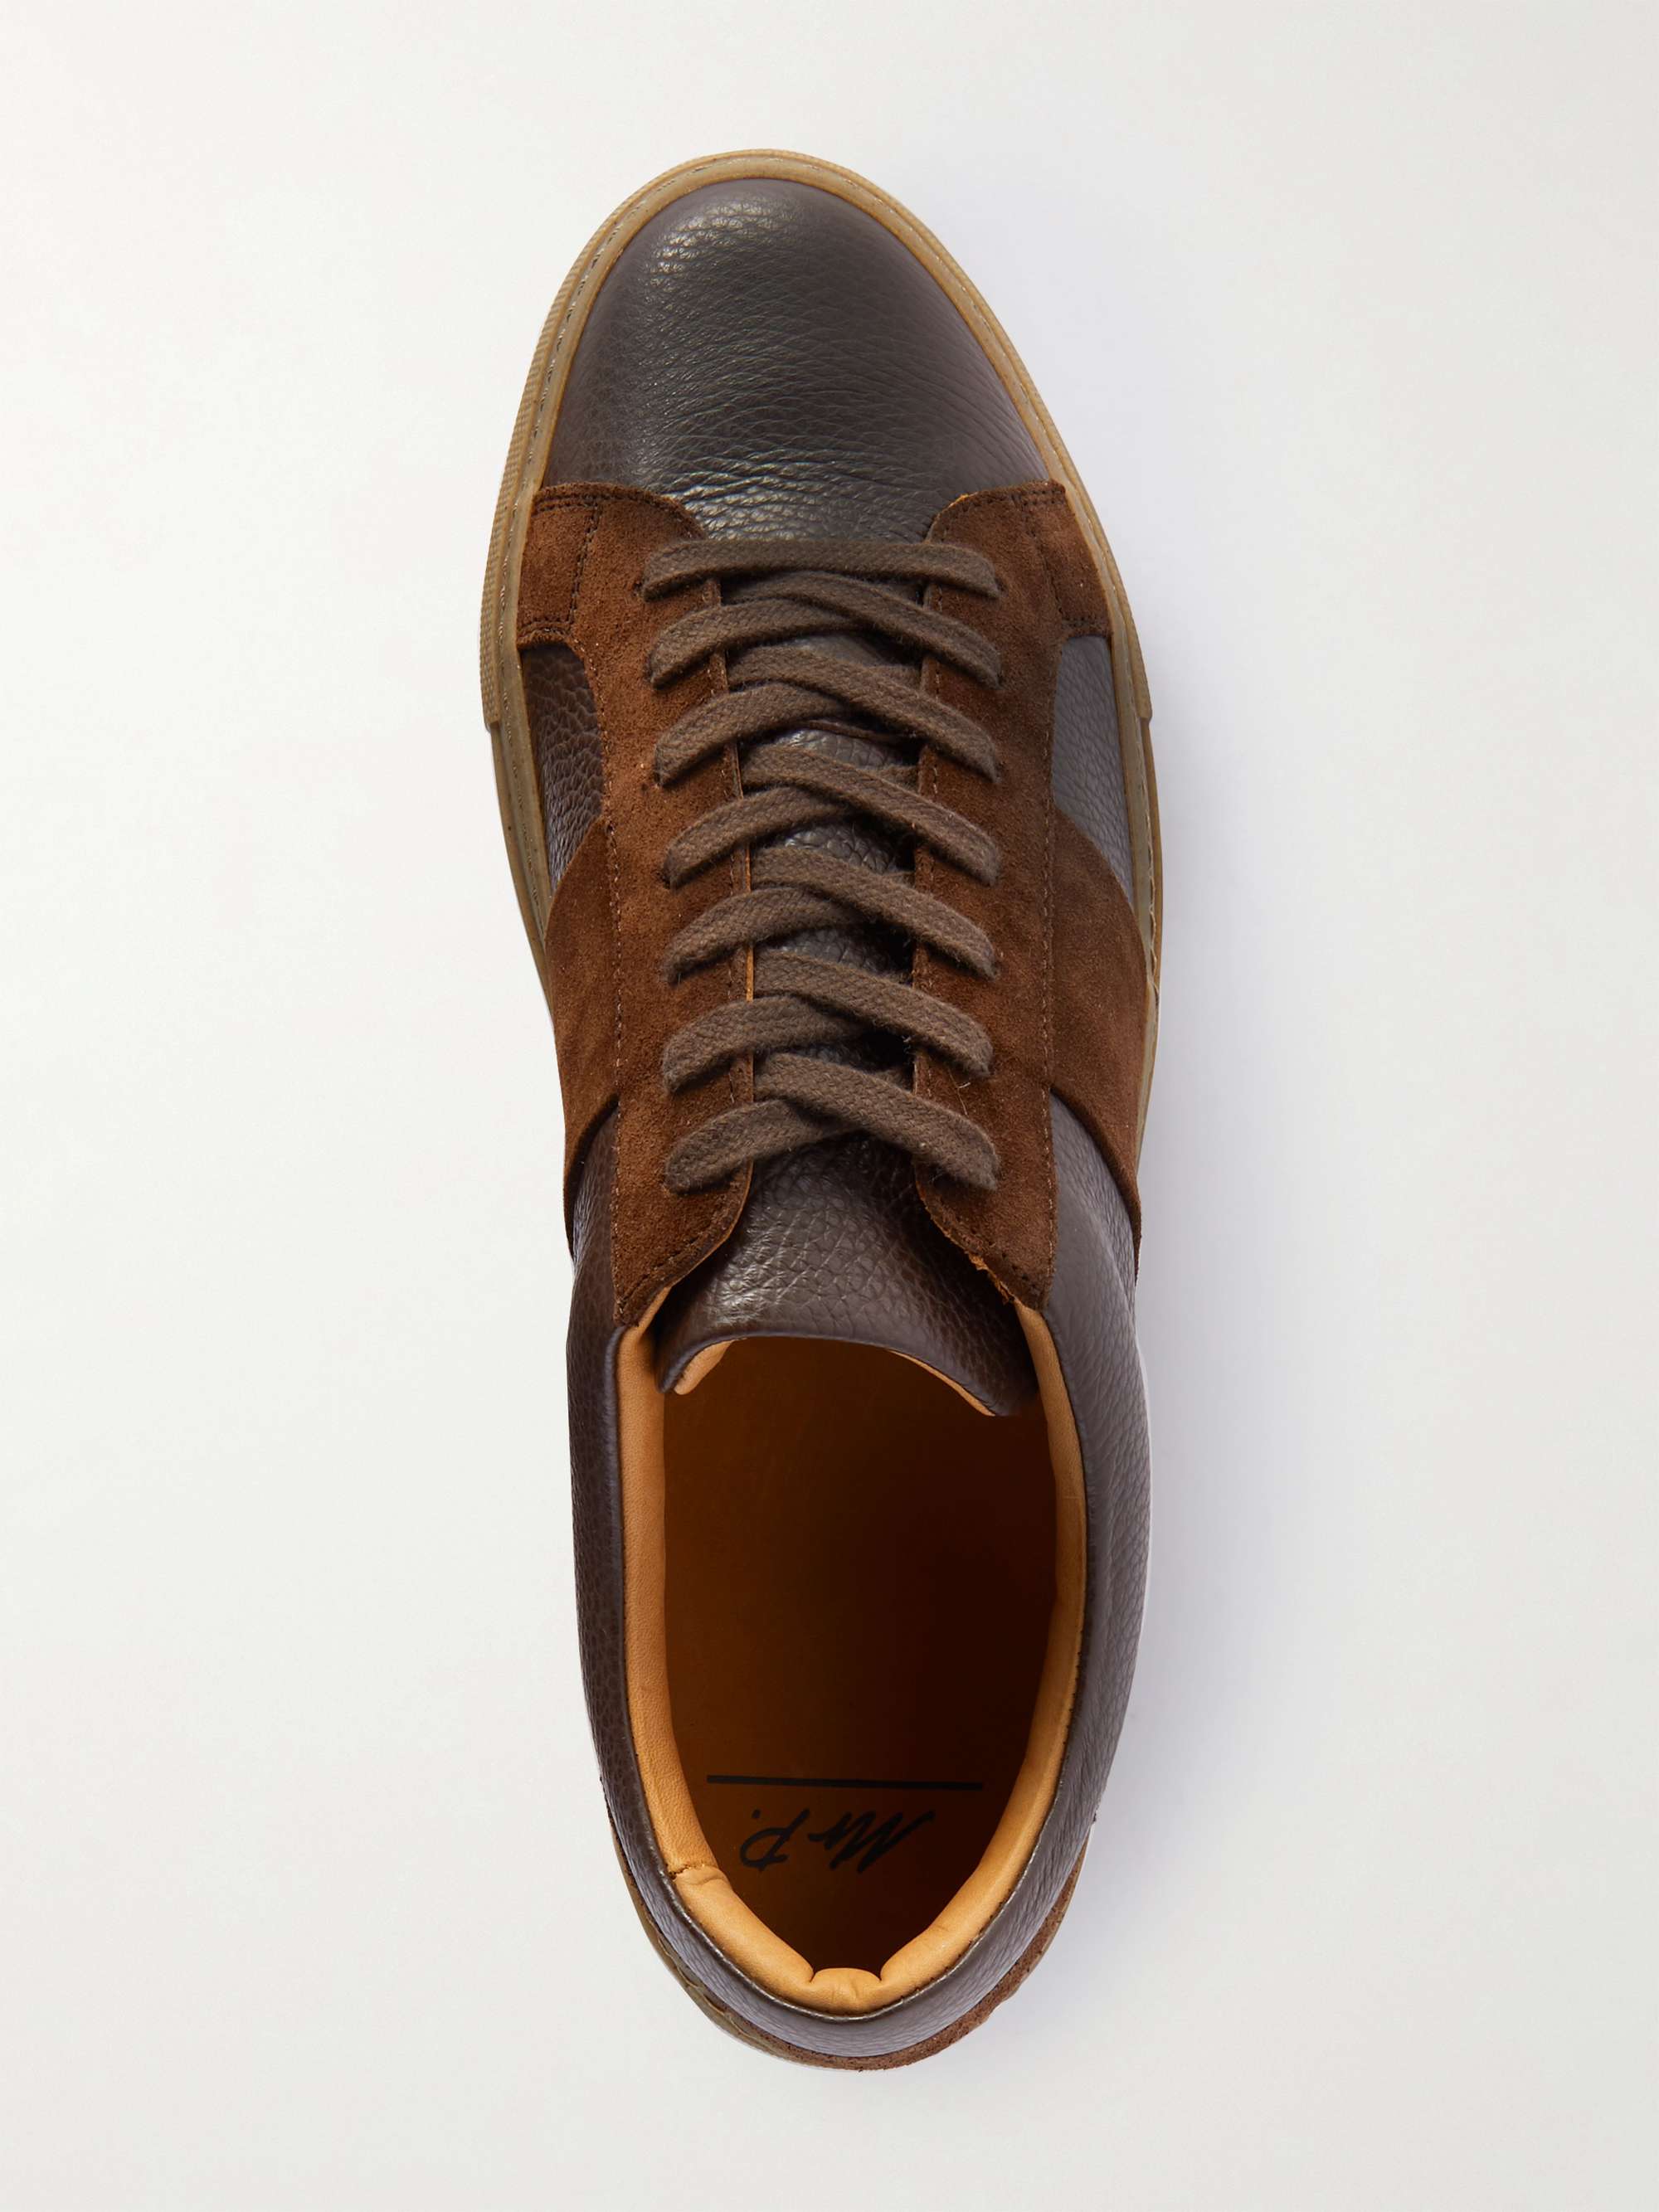 MR P. Larry Regenerated Suede by evolo® and Full-Grain Leather Sneakers